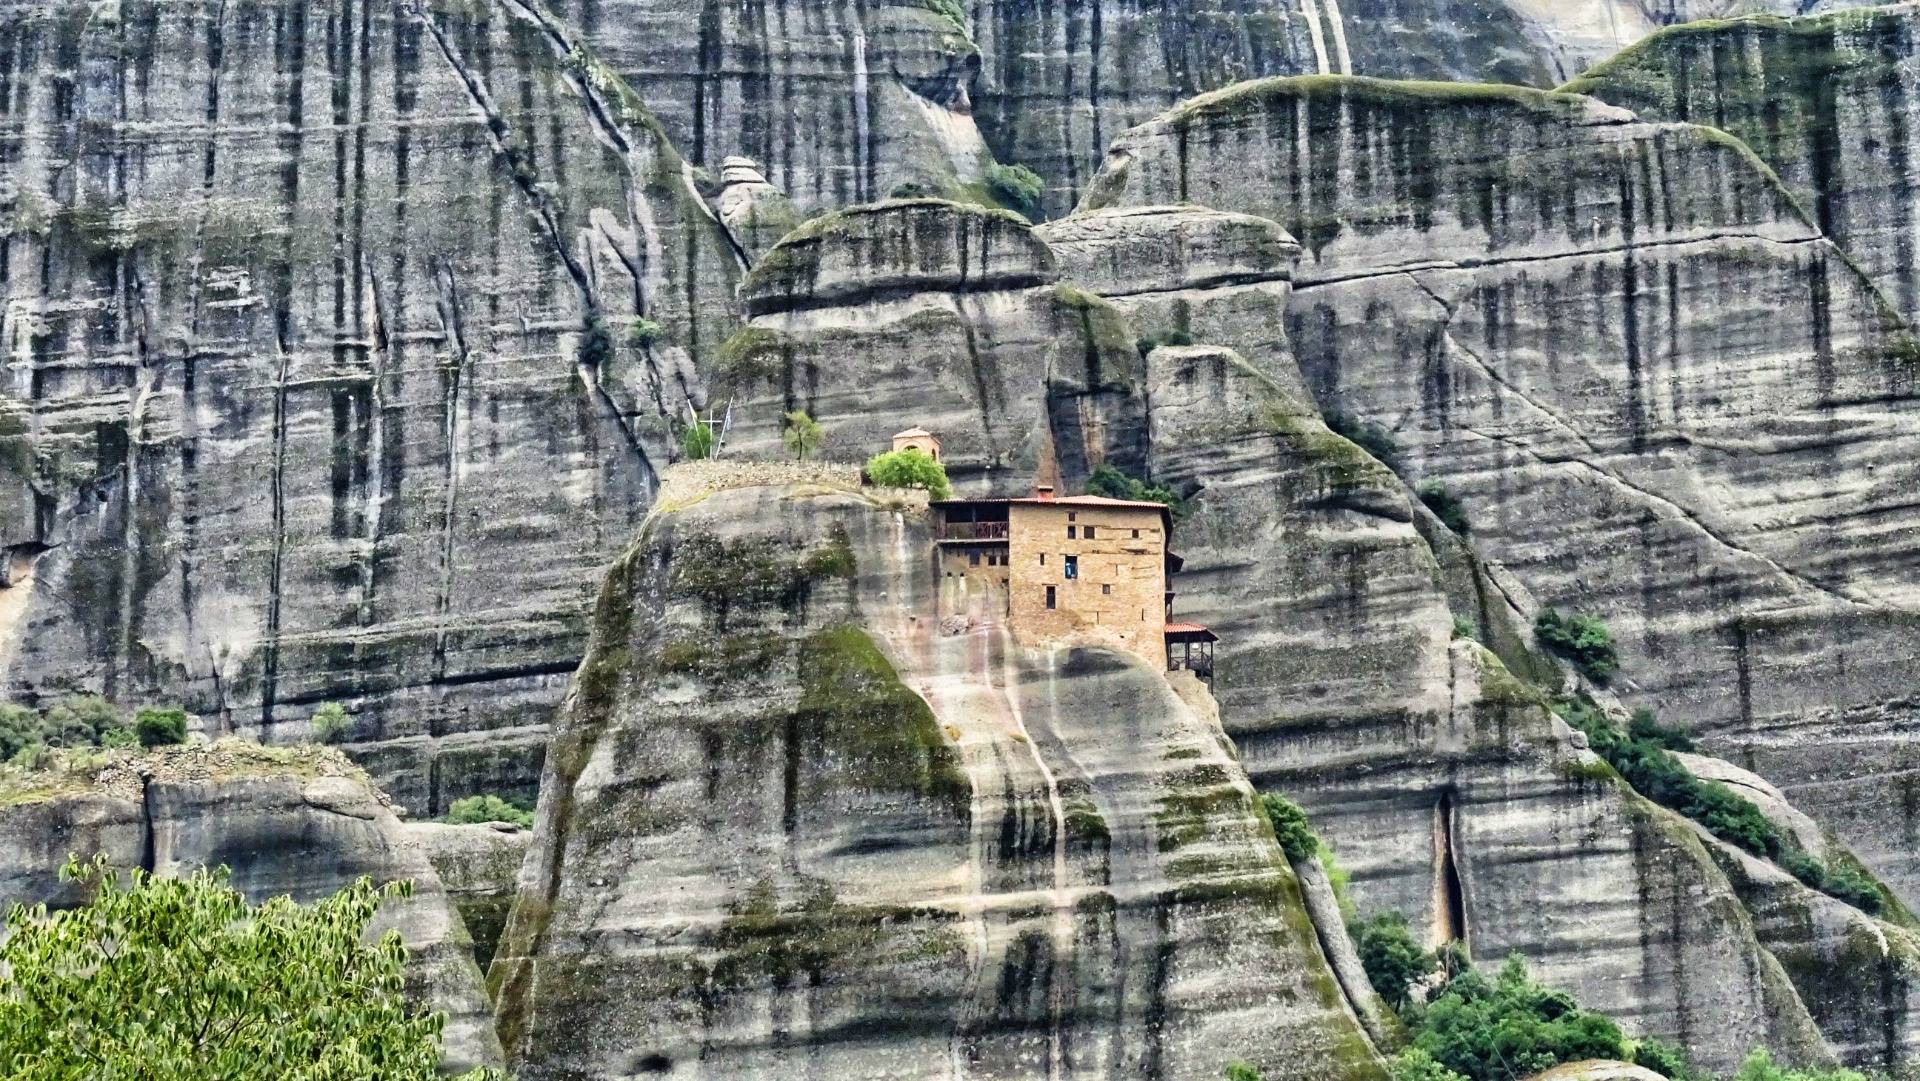 Floating monasteries: So high in the sky